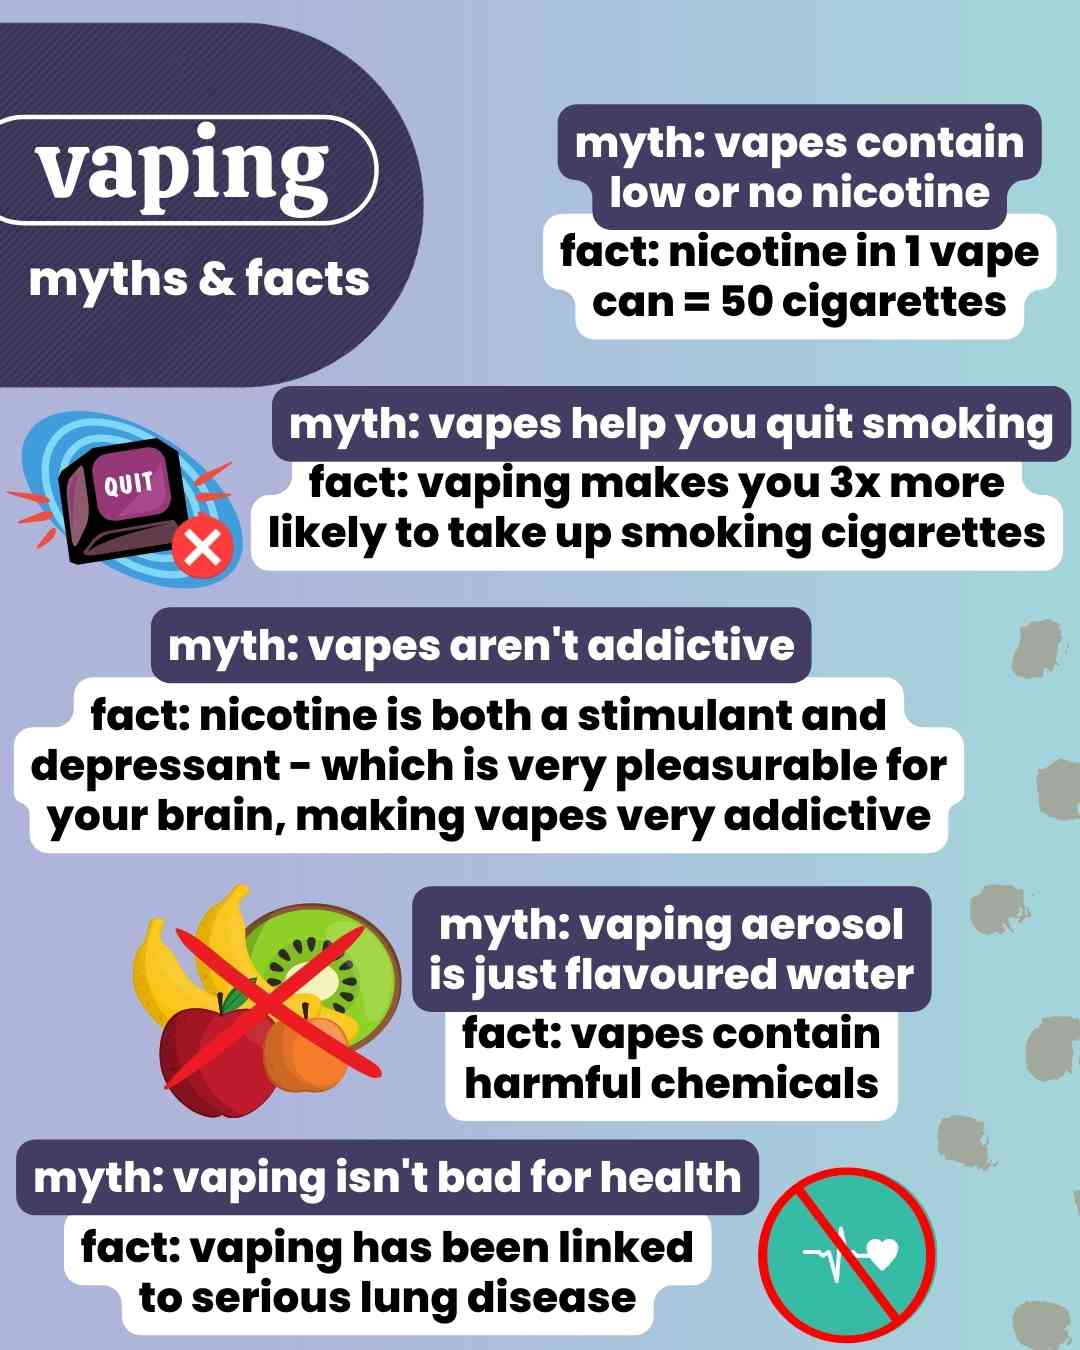 Vaping: myths & facts poster. Nicotine in 1 vape can = 50 cigarettes. Vaping makes you 3x more likely to take up smoking. Vapes contain harmful chemicals. Vaping is addictive and has been linked to serious lung disease.